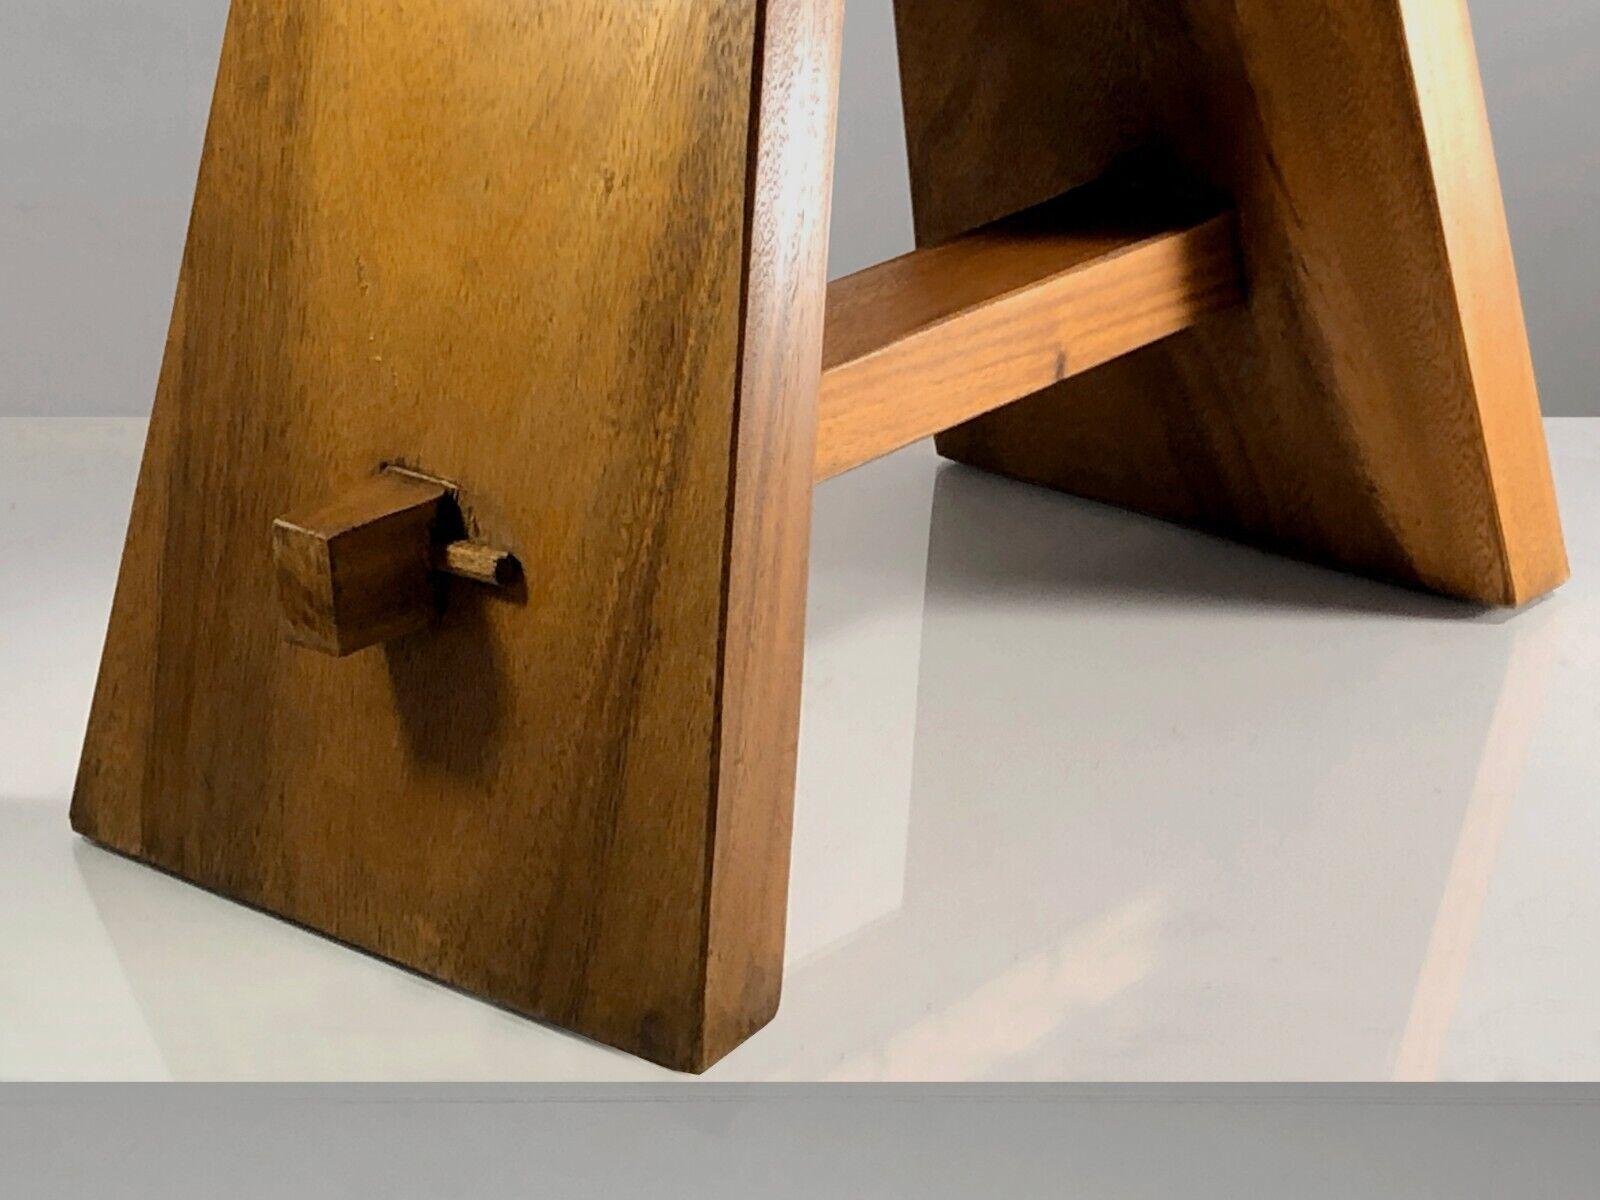 A beautiful and sculptural massive elm Stool, thick and sensual lines, Modernist, Forme Libre, Brutalist, Folk Art, in the spirit of Pierre Chapo & Charlotte Perriand, to be attributed, France, 1950.